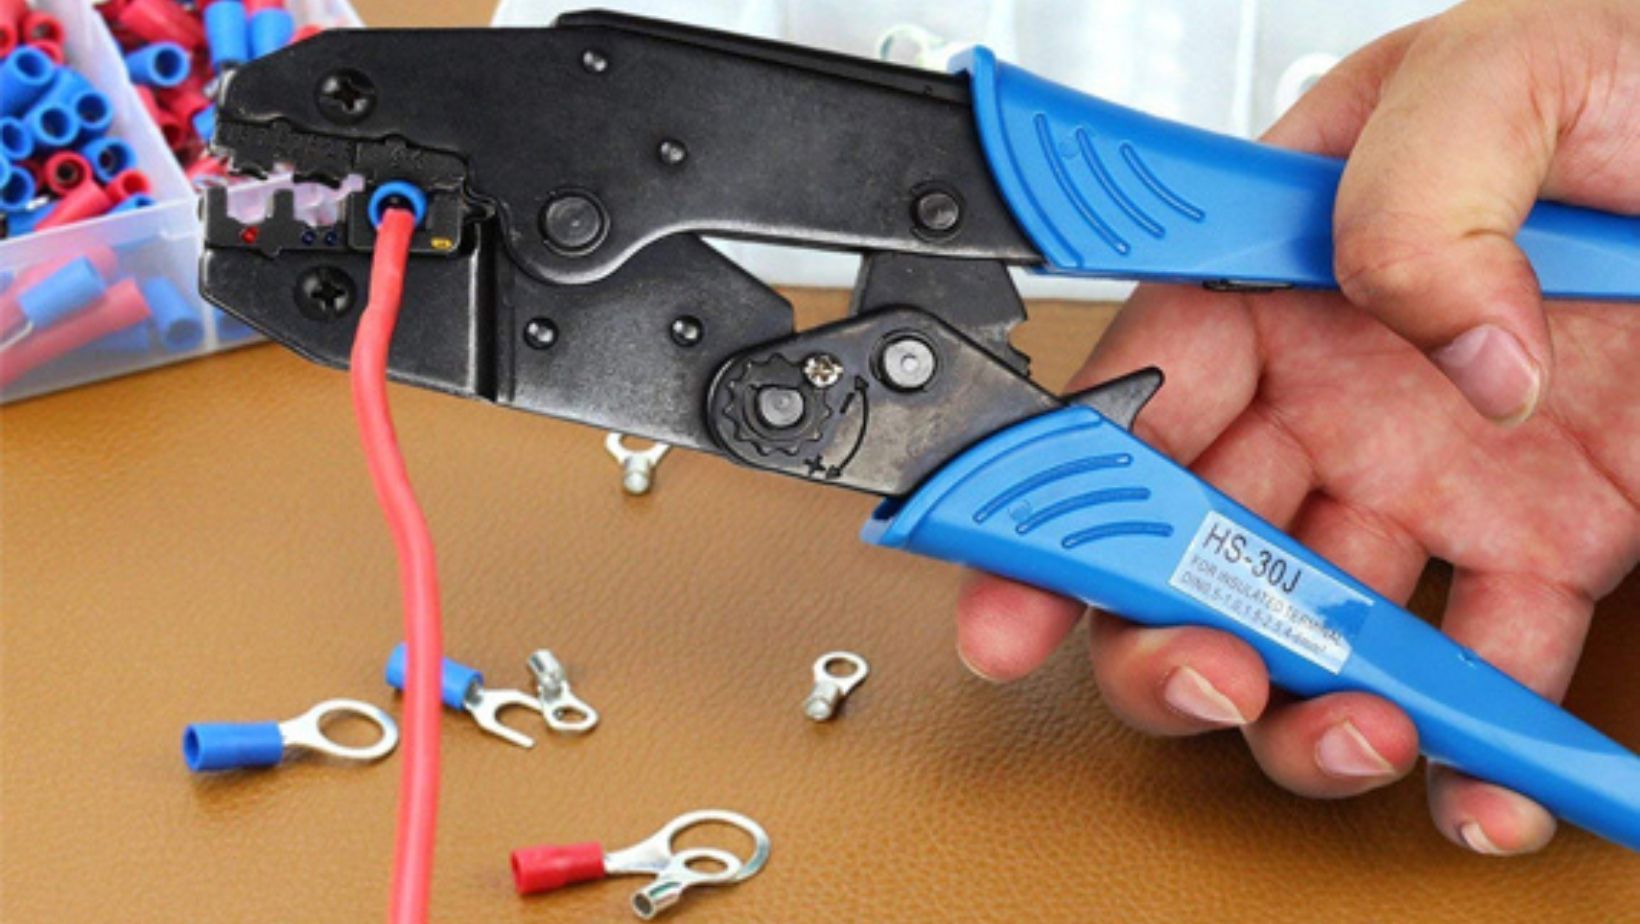 An electrician crimping a cable